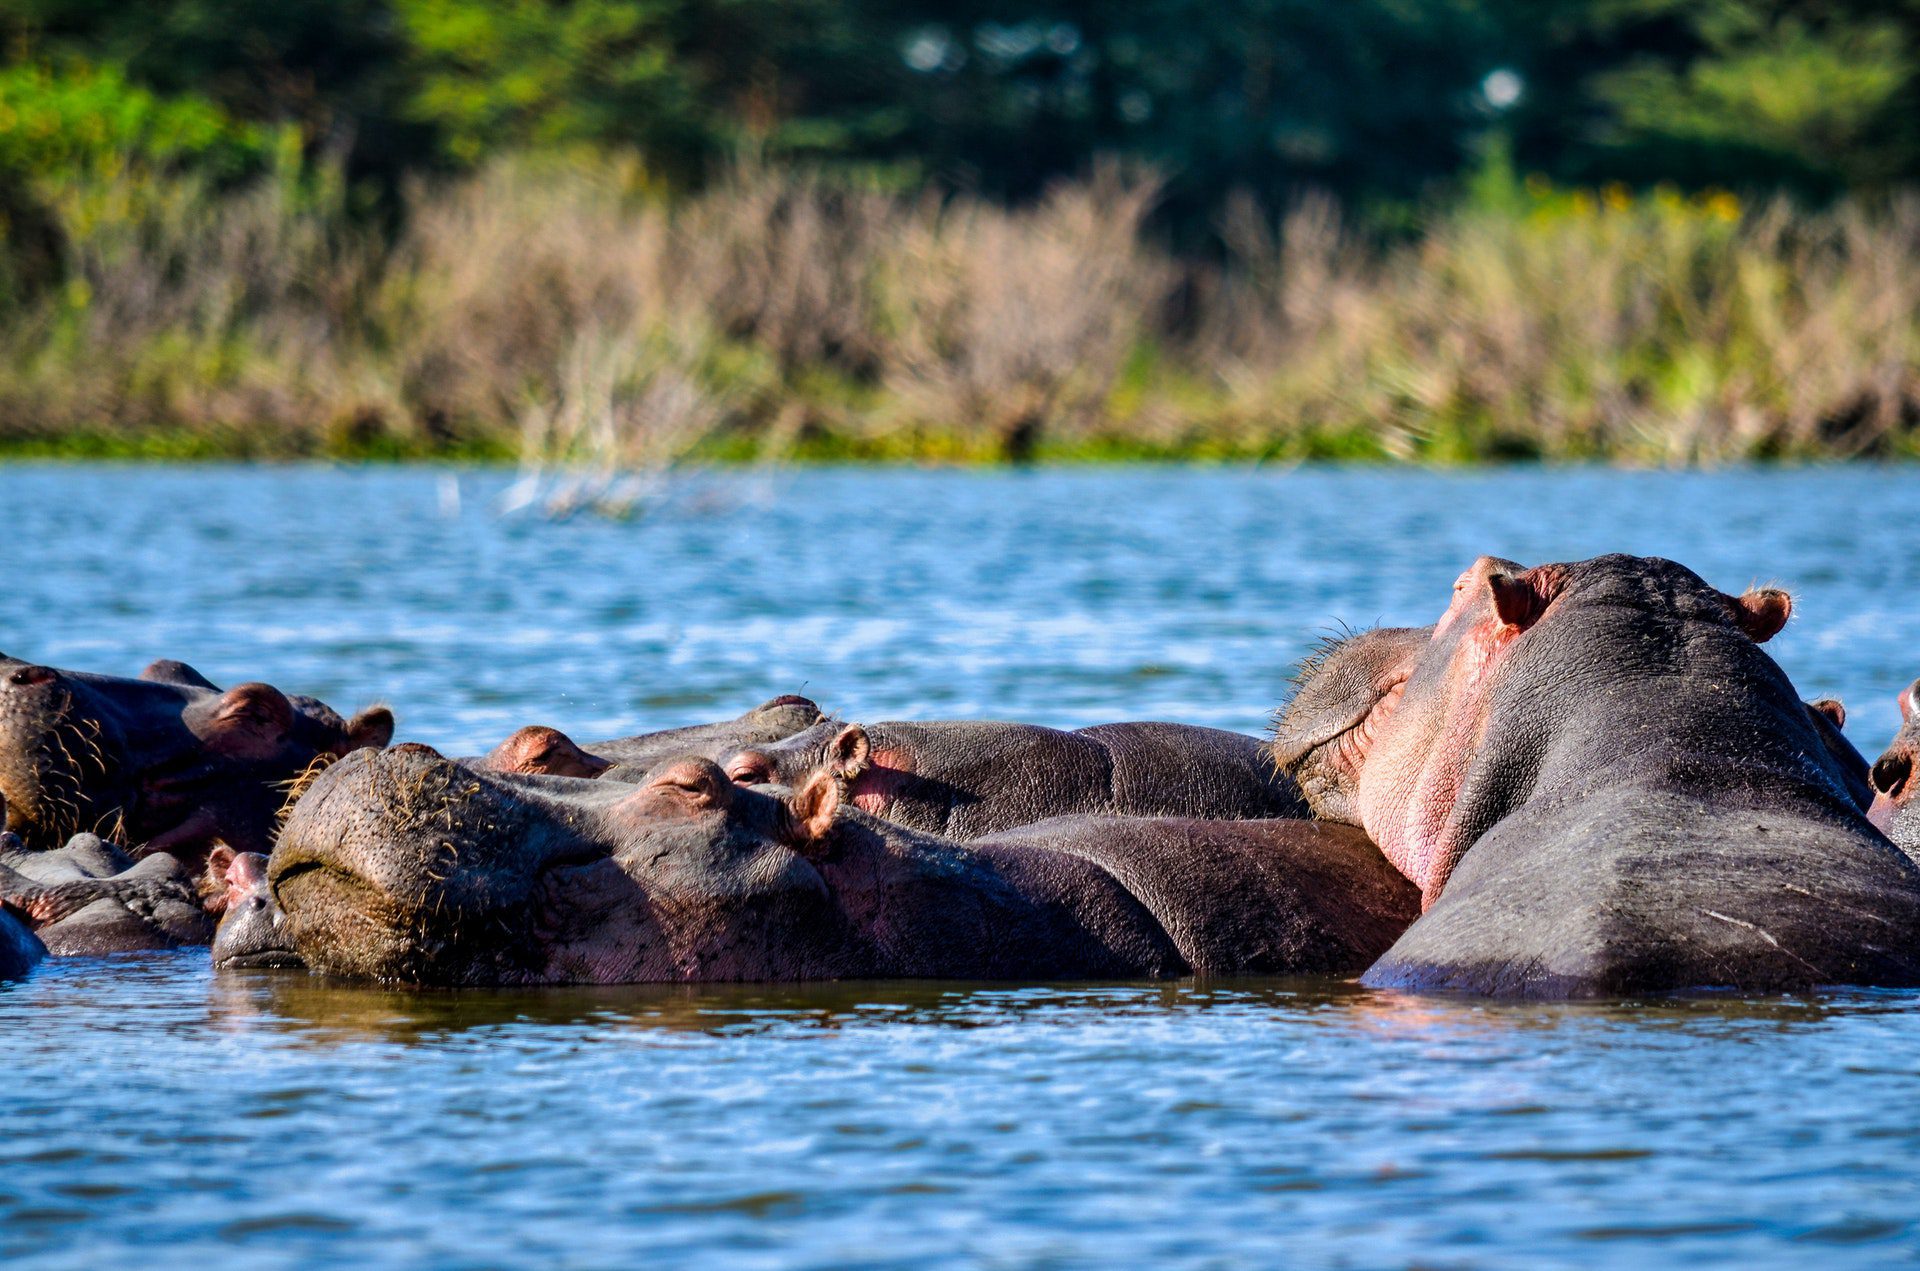 Hippo Hunting in Africa: How It Can Benefit Hippo Populations